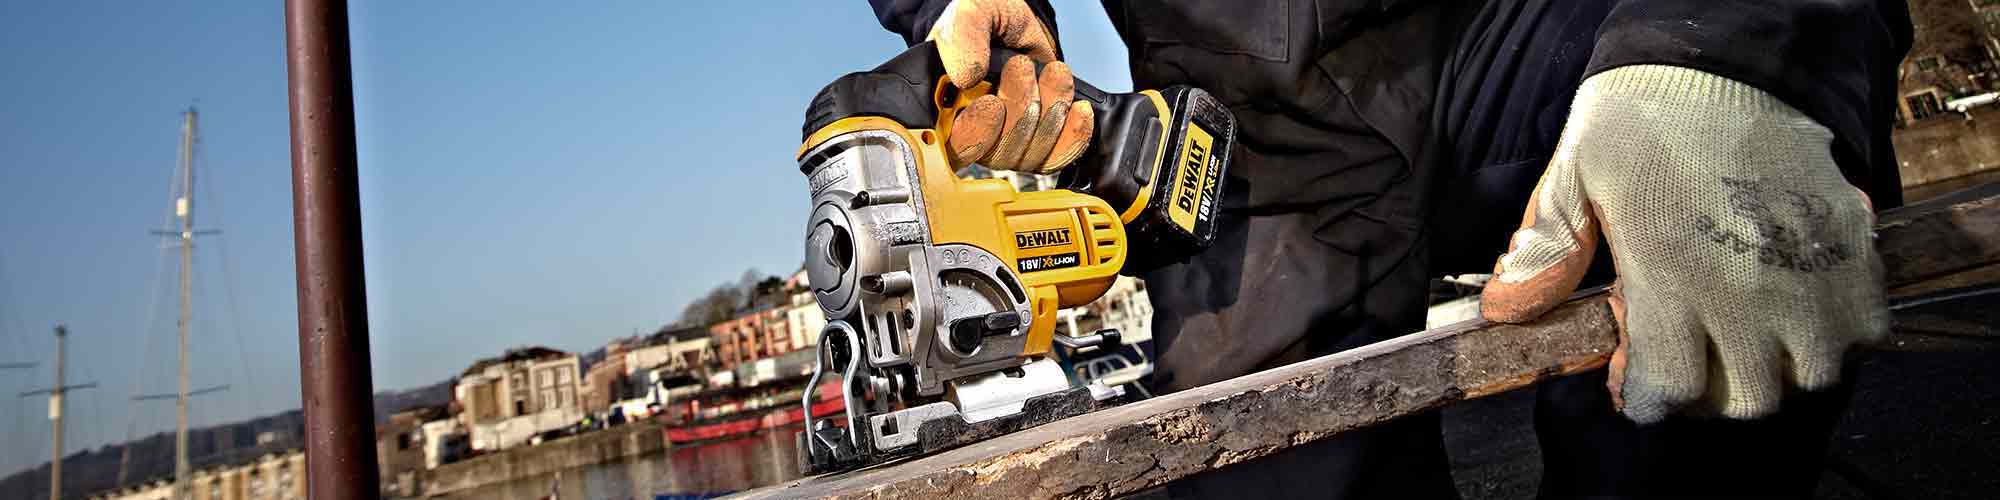 Cordless Jigsaw Buying Guide